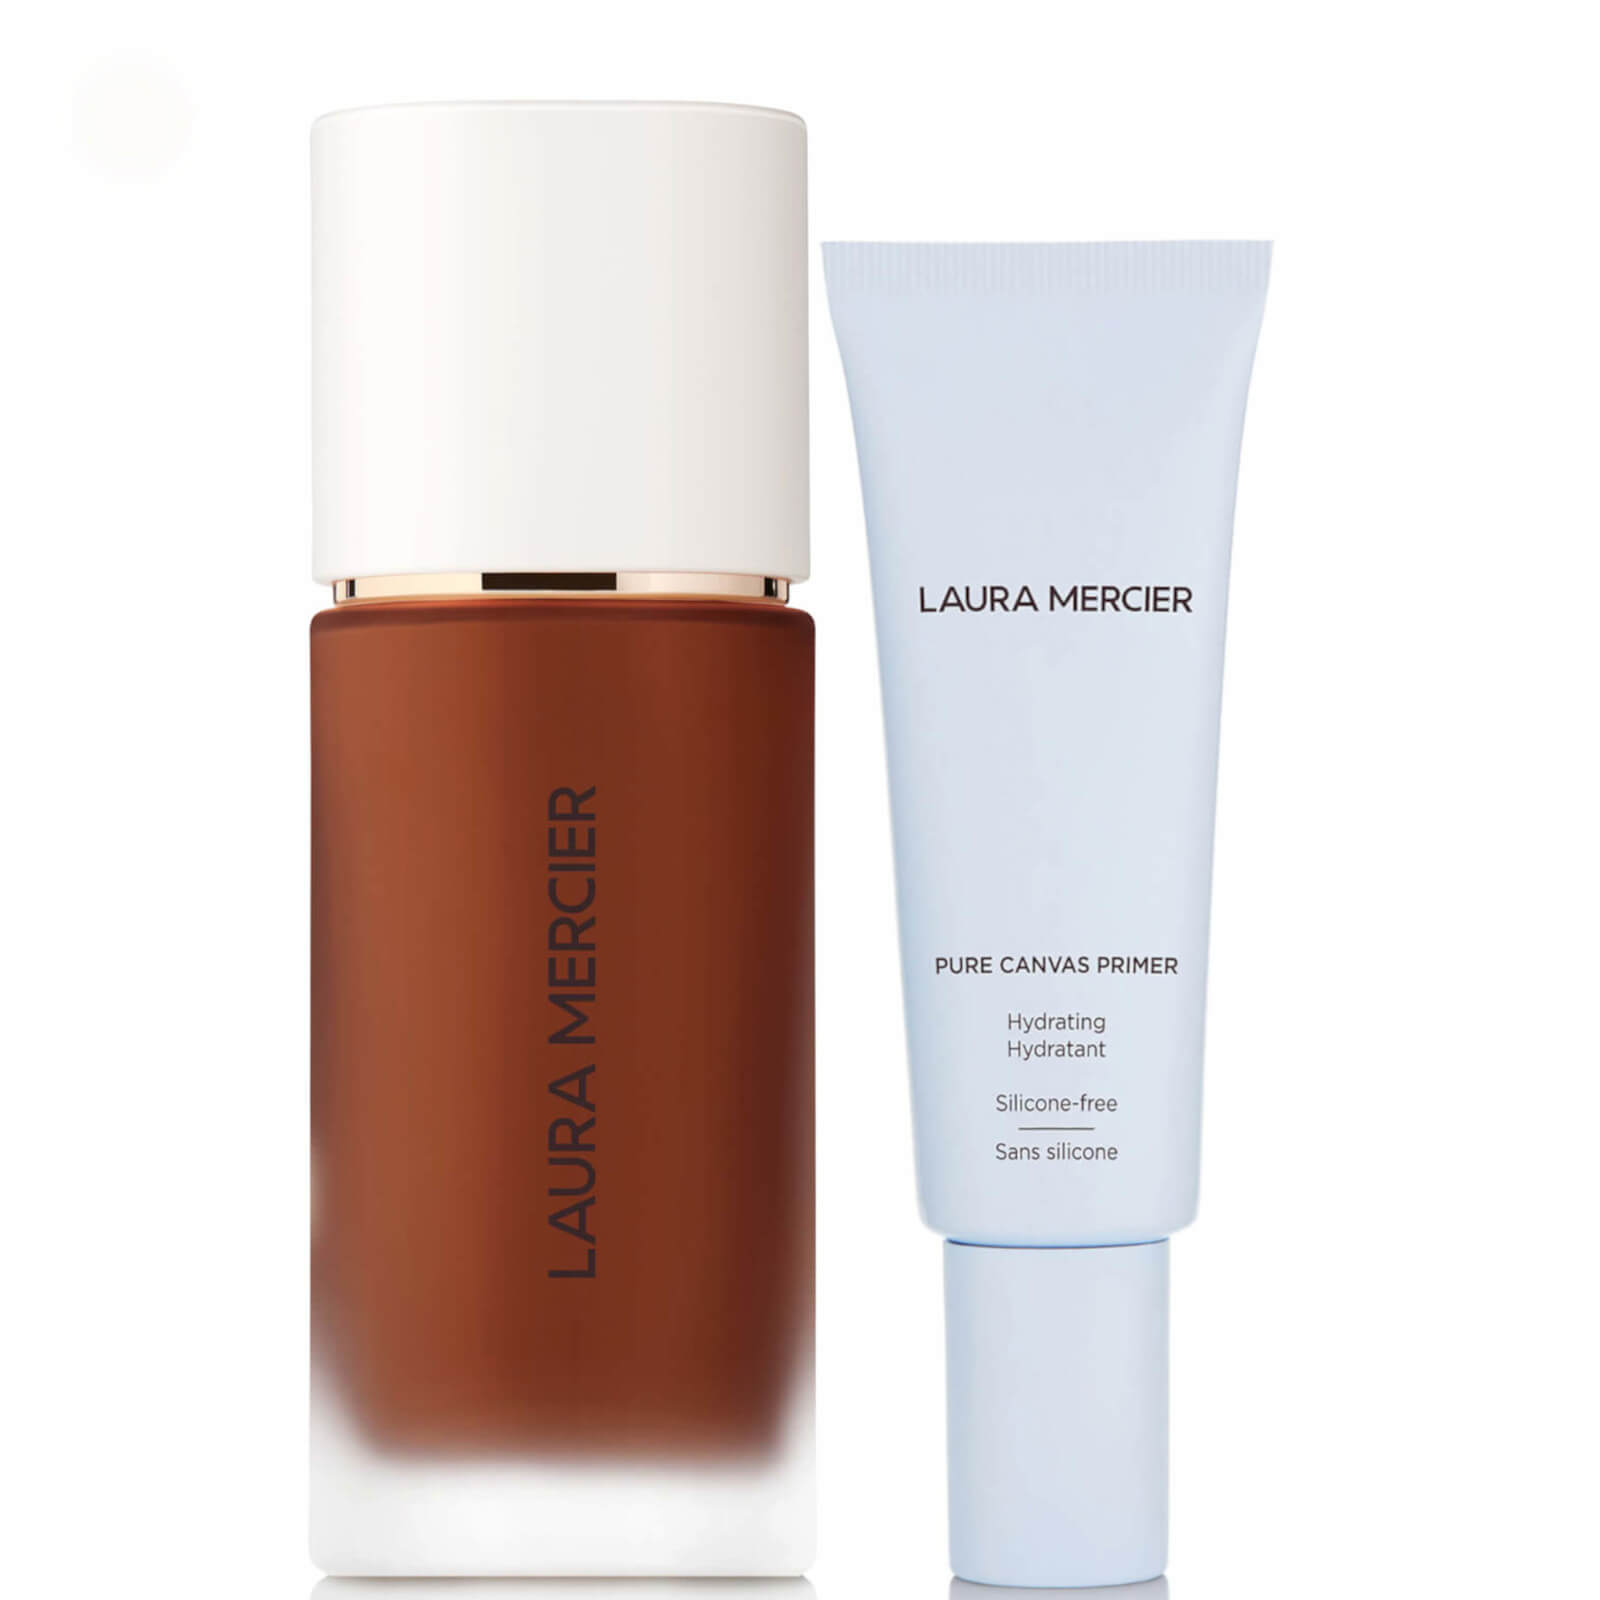 Laura Mercier Real Flawless Foundation and Pure Canvas Hydrating Primer Bundle (Various Shades) - 6C